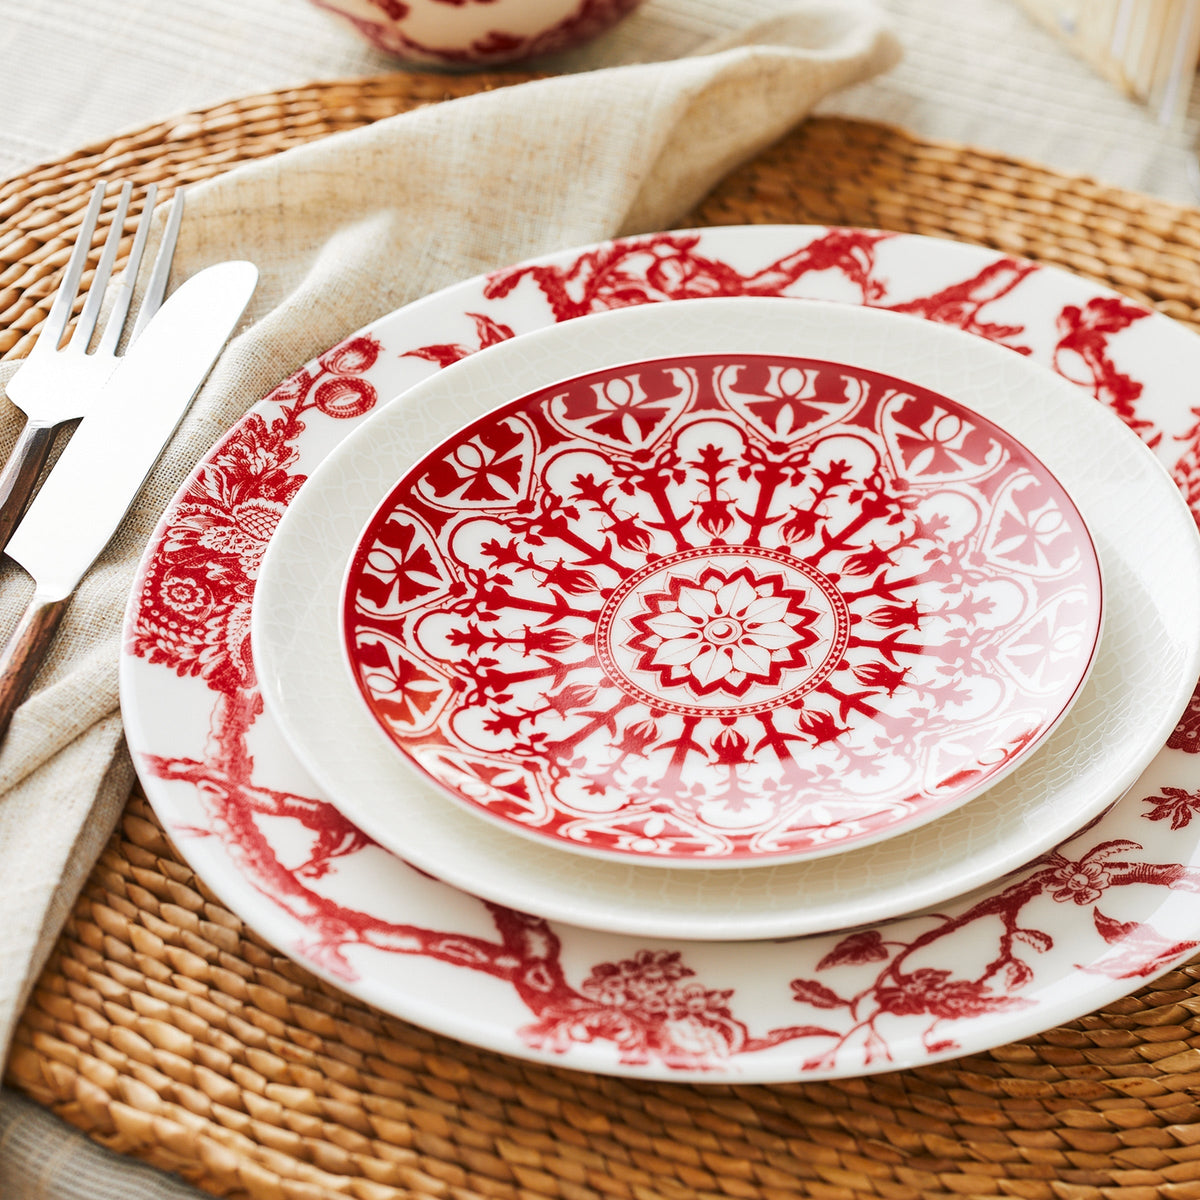 A place setting featuring a white and red patterned **Casablanca Crimson Small Plate by Caskata Artisanal Home** on top of a larger matching Casablanca dinnerware plate, with a fork and knife placed on an ornate scrollwork beige napkin, all arranged on a woven placemat.